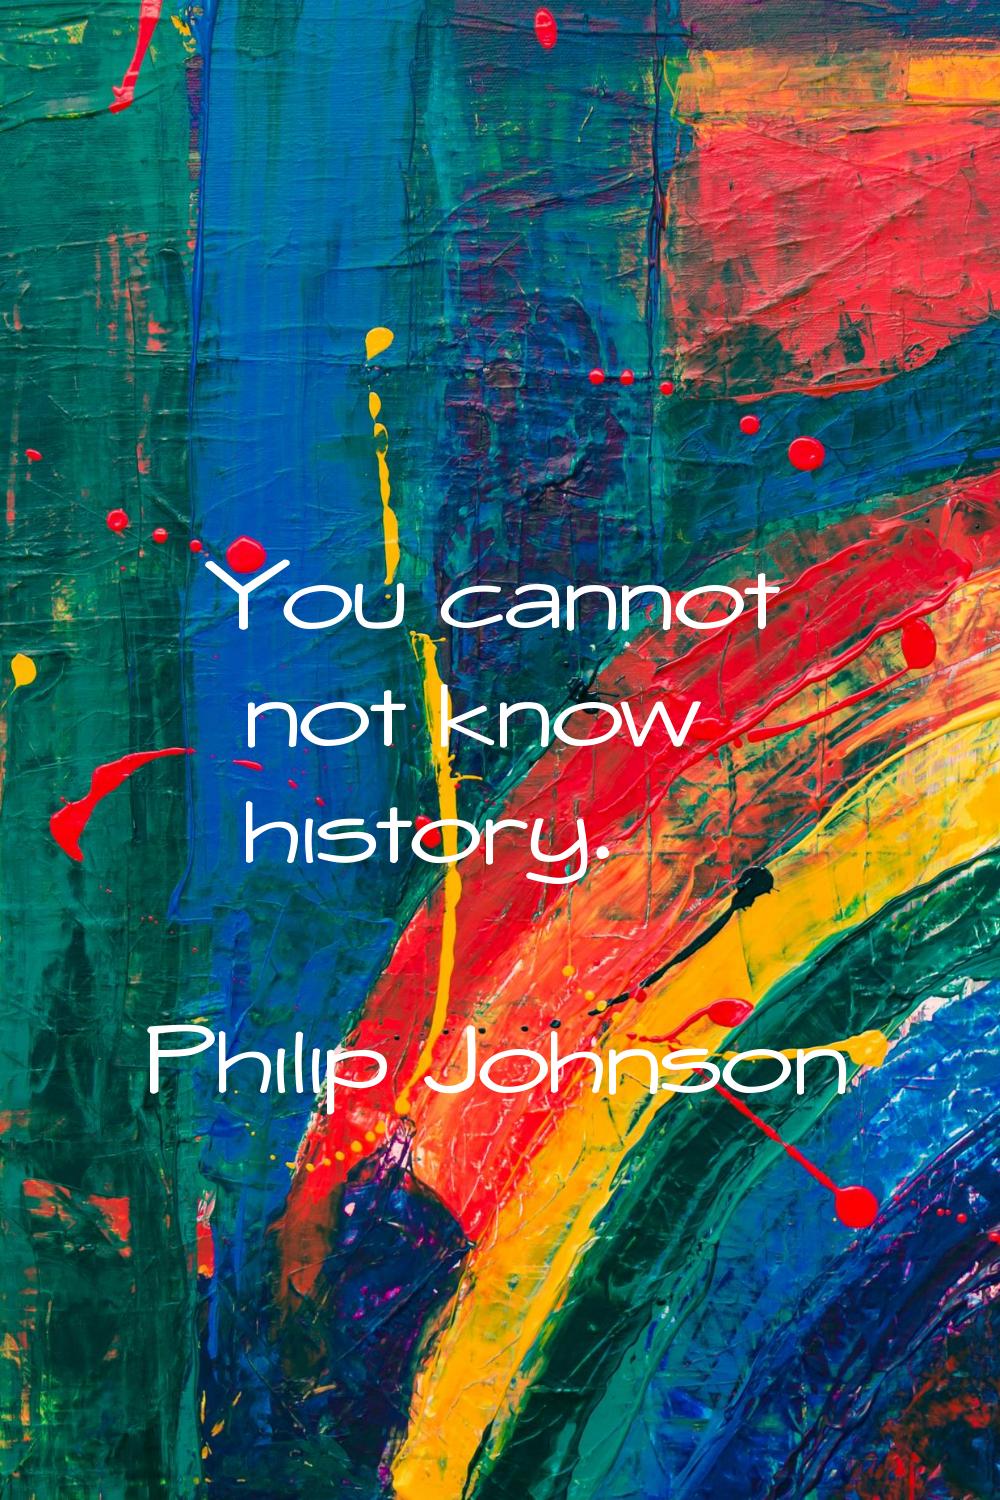 You cannot not know history.